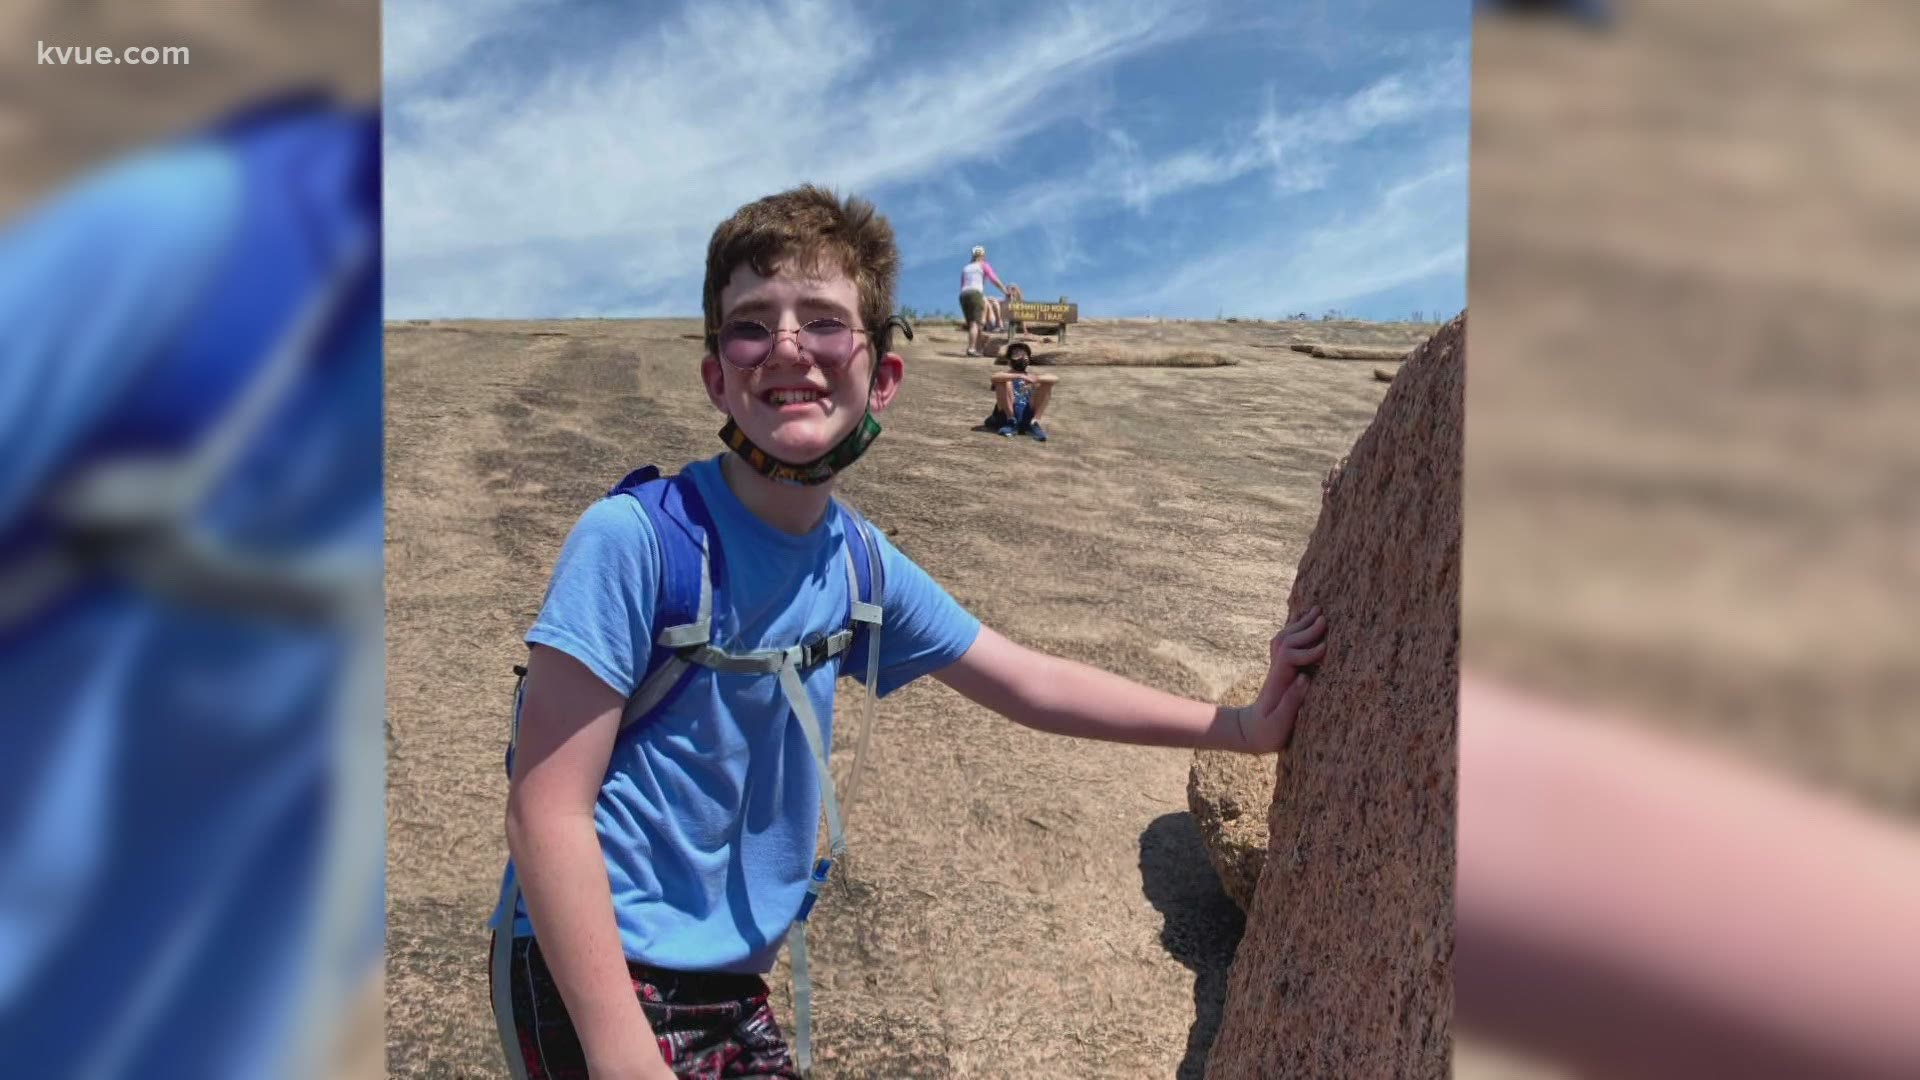 A teen with cerebral palsy inspired his class when he climbed Enchanted Rock. The class field trip turned into a lesson of strength and perseverance.